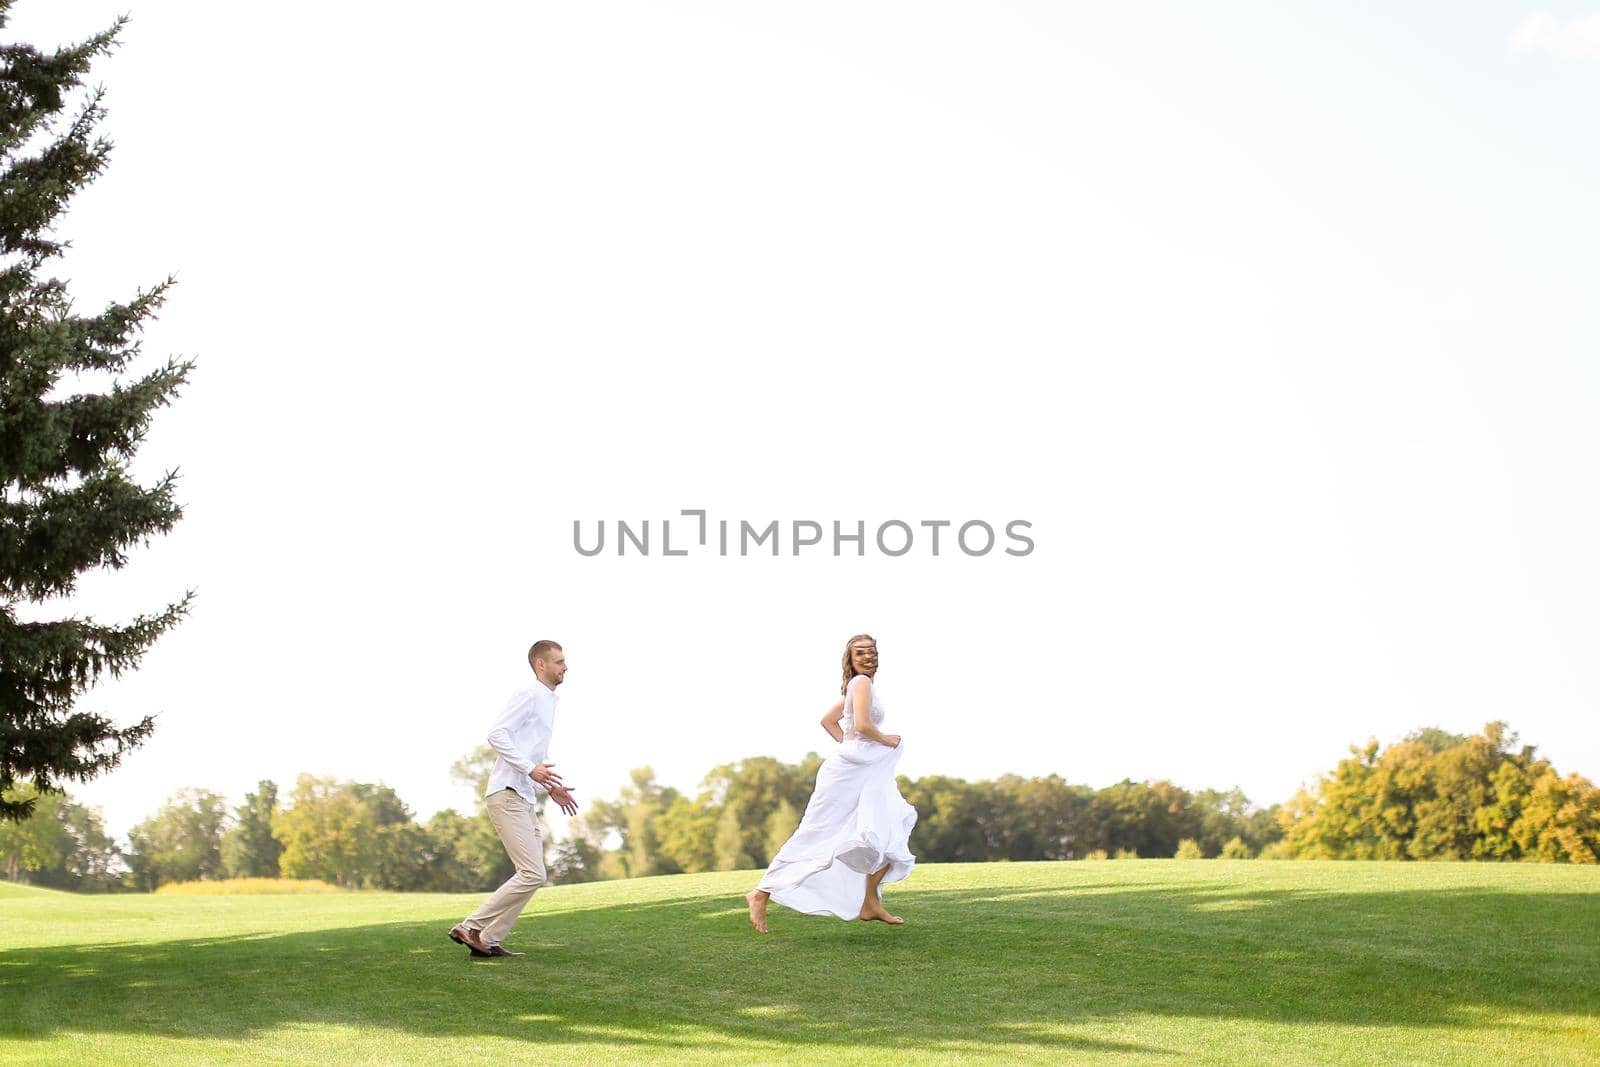 Groom and bride running and playing on grass. Concept of wedding photo session on open air and nature.